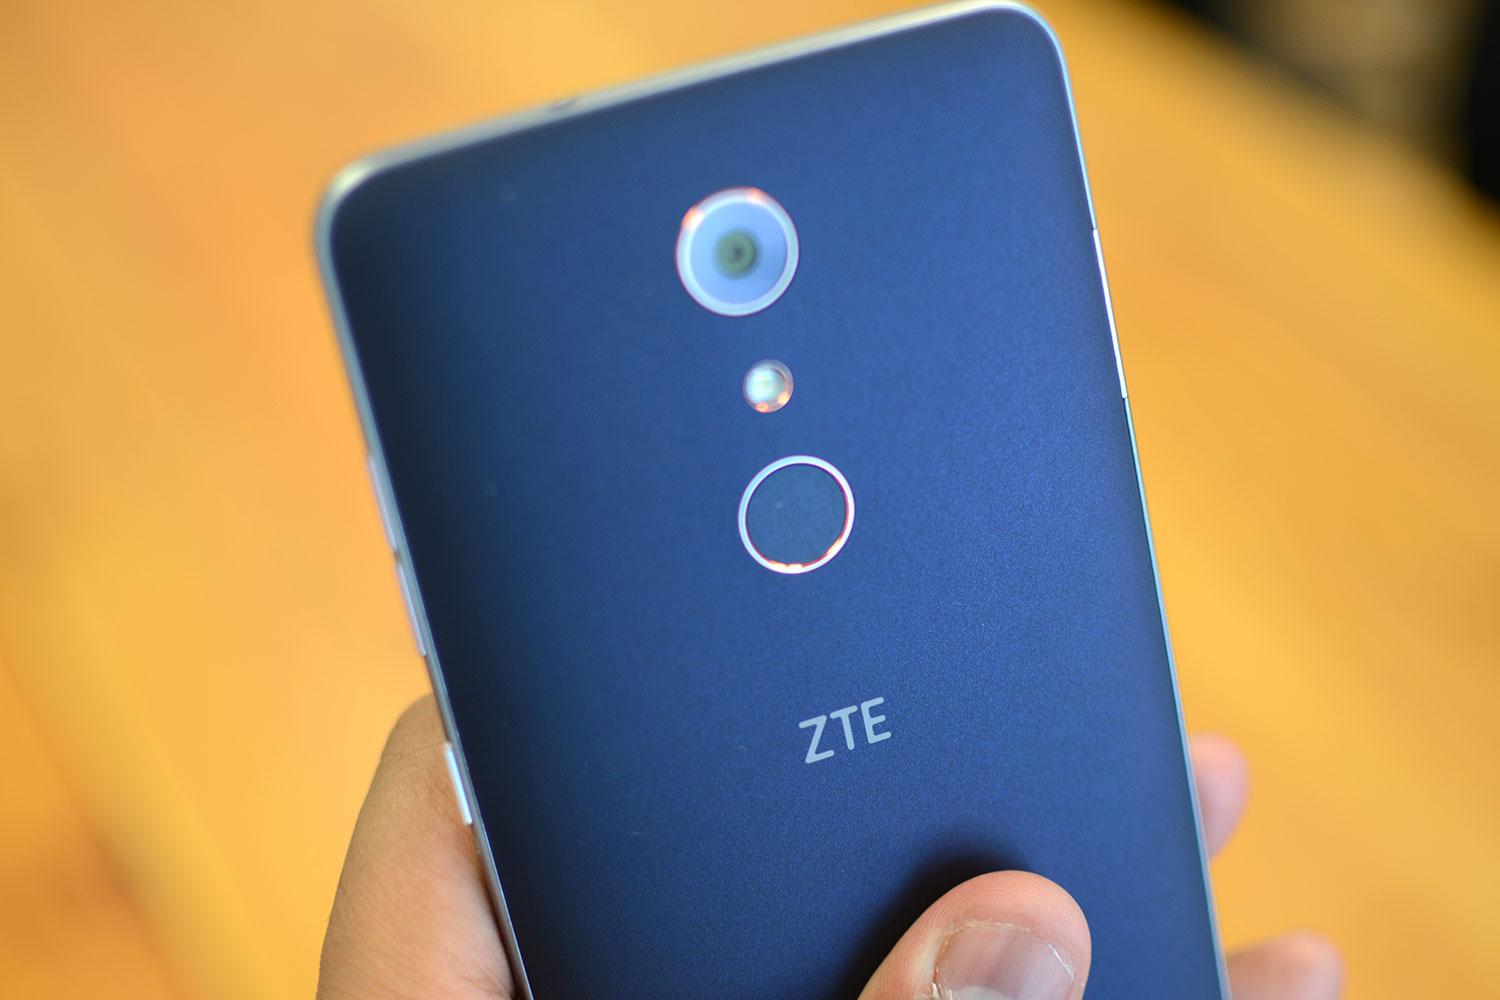 ZTE ZMax Pro 2 | News, Rumors, Specs, and More | Digital Trends